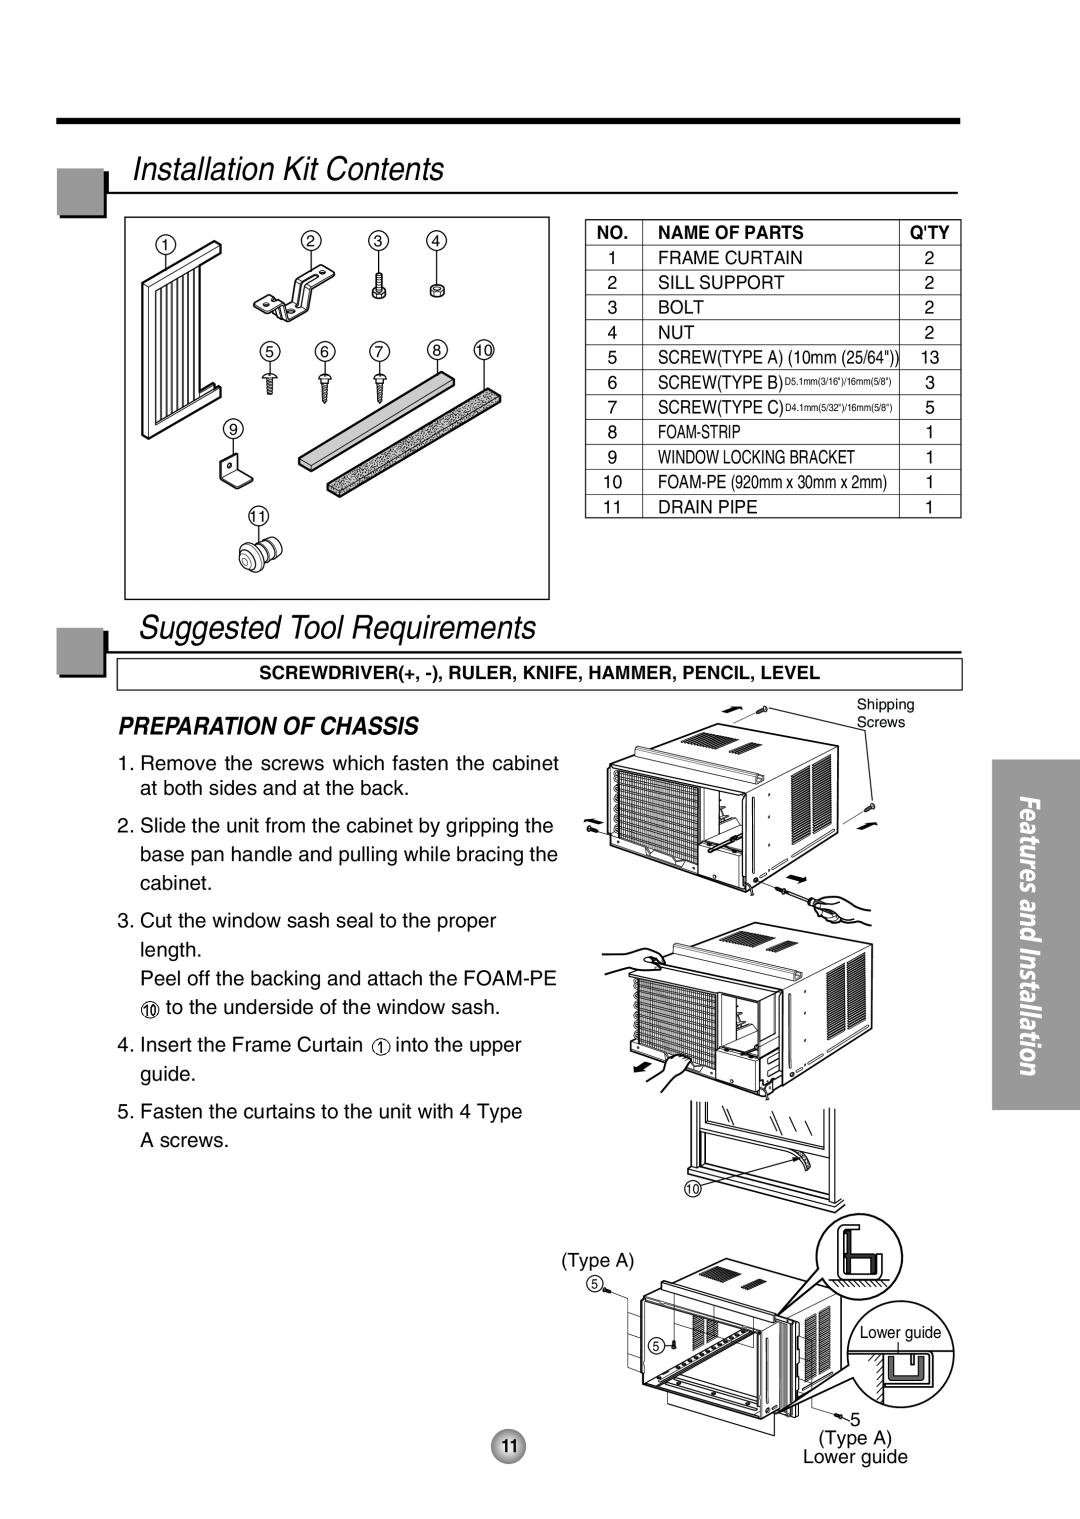 Panasonic CW-XC85HU, CW-XC65HU manual Installation Kit Contents, Suggested Tool Requirements, Preparation Of Chassis 